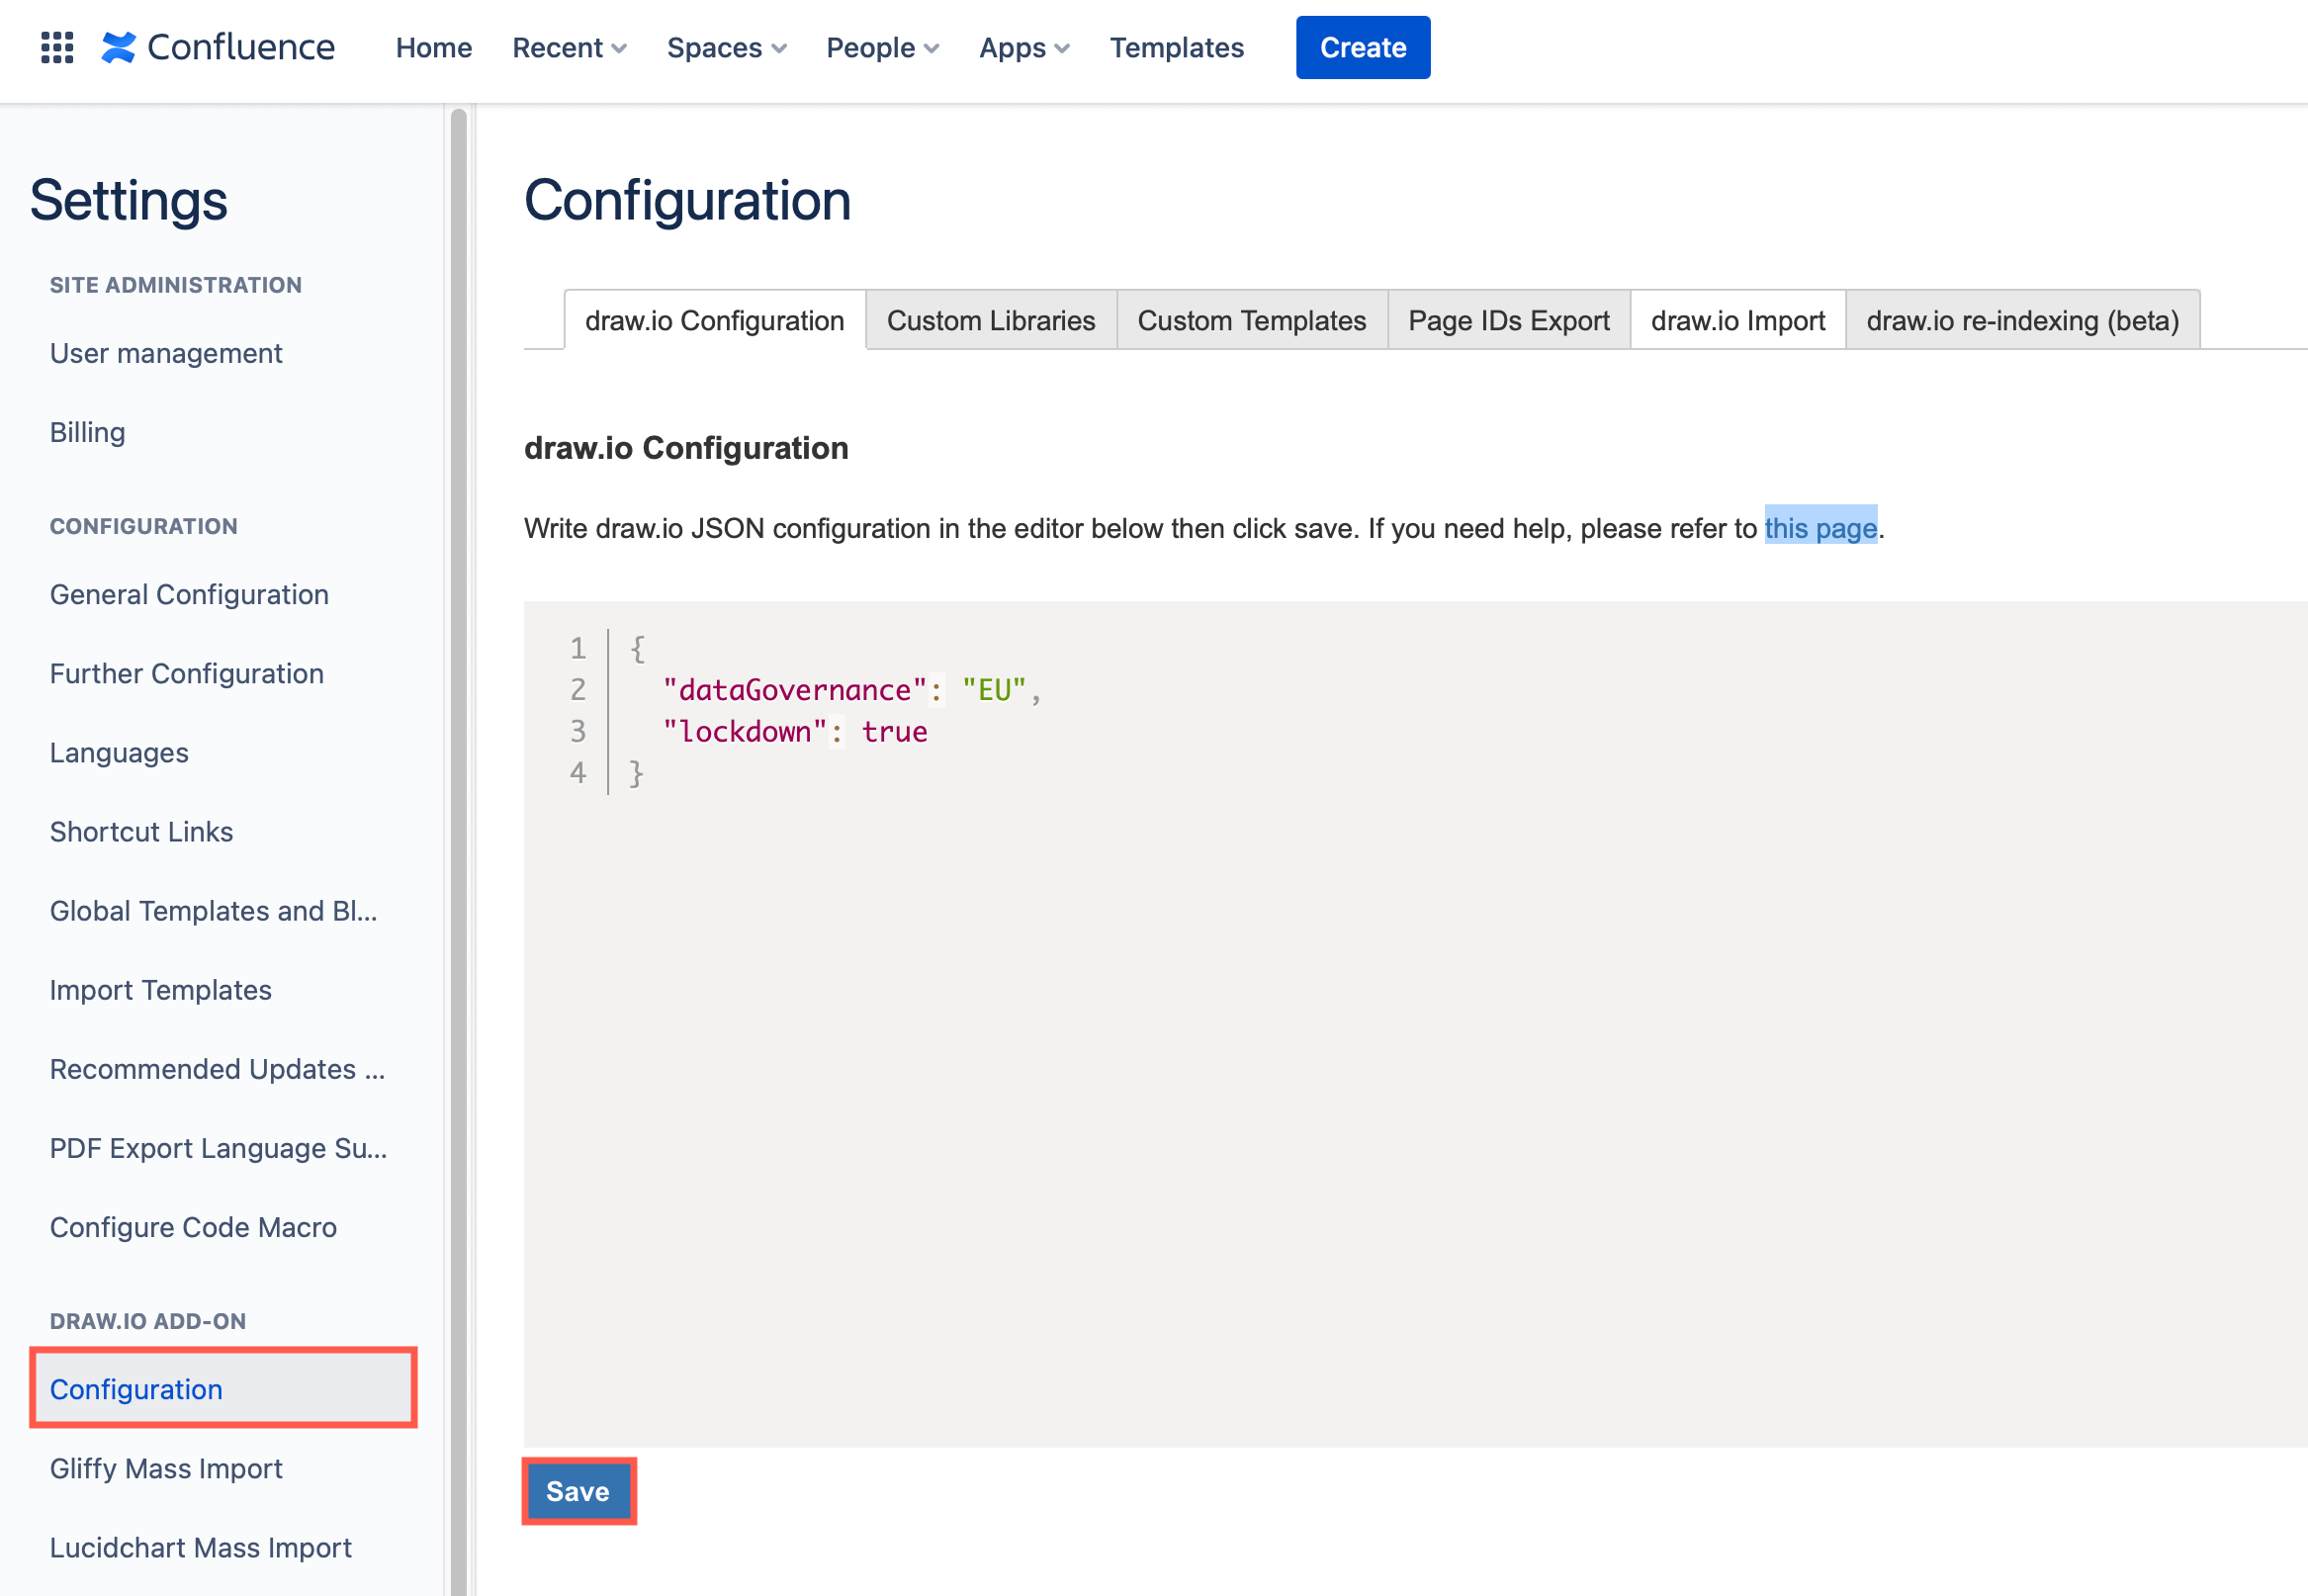 Set which draw.io server endpoint region to use and restrict data transmission to between browser and Confluence Cloud in the draw.io app configuration JSON code